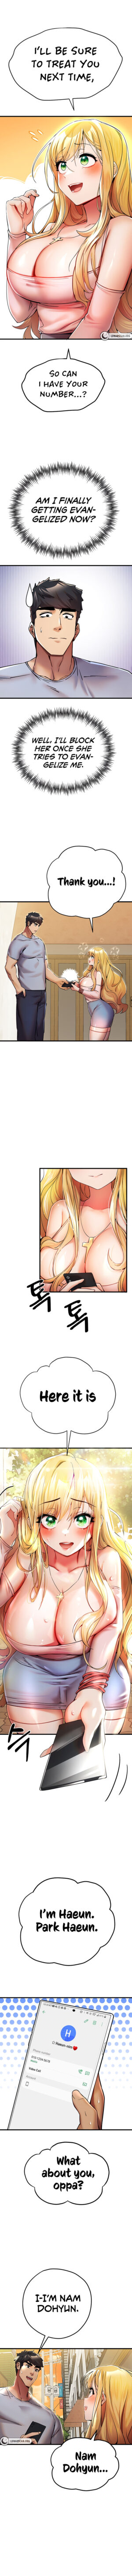 [Duke Hangul, Na Sunhyang] I Have To Sleep With A Stranger? (1-17) [English] [Lunar Scans] [Ongoing]